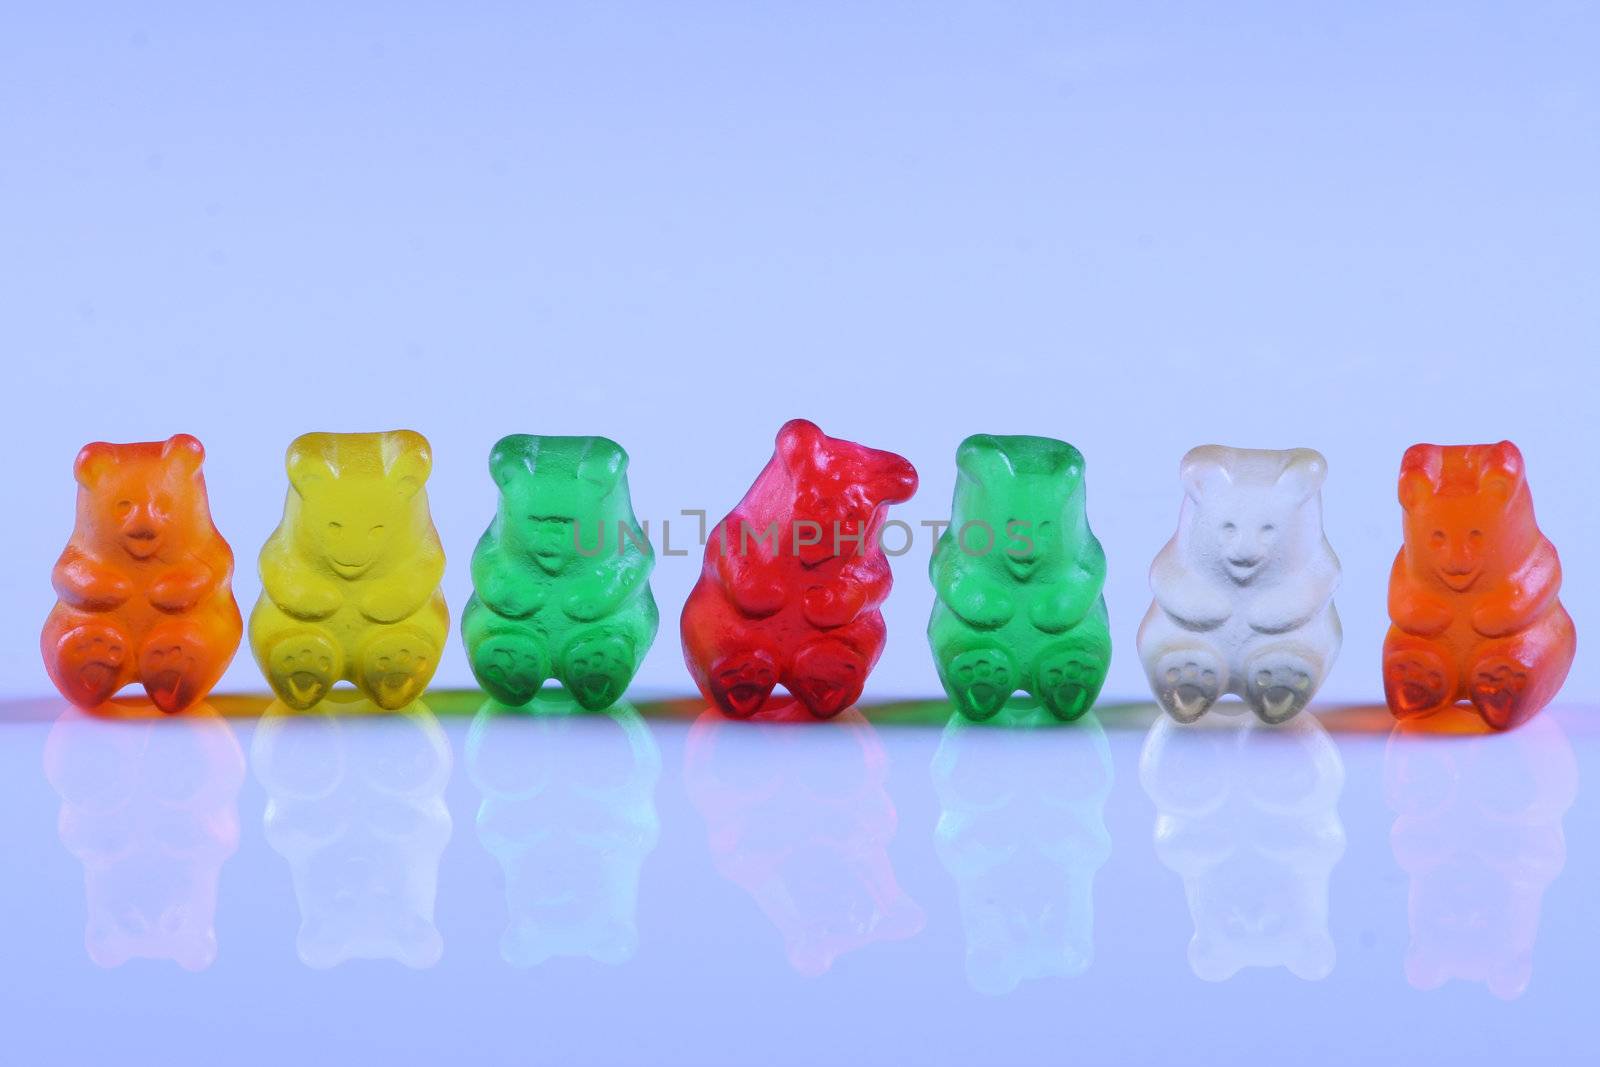 Colorful gummy bears lined up in rows; by jarenwicklund